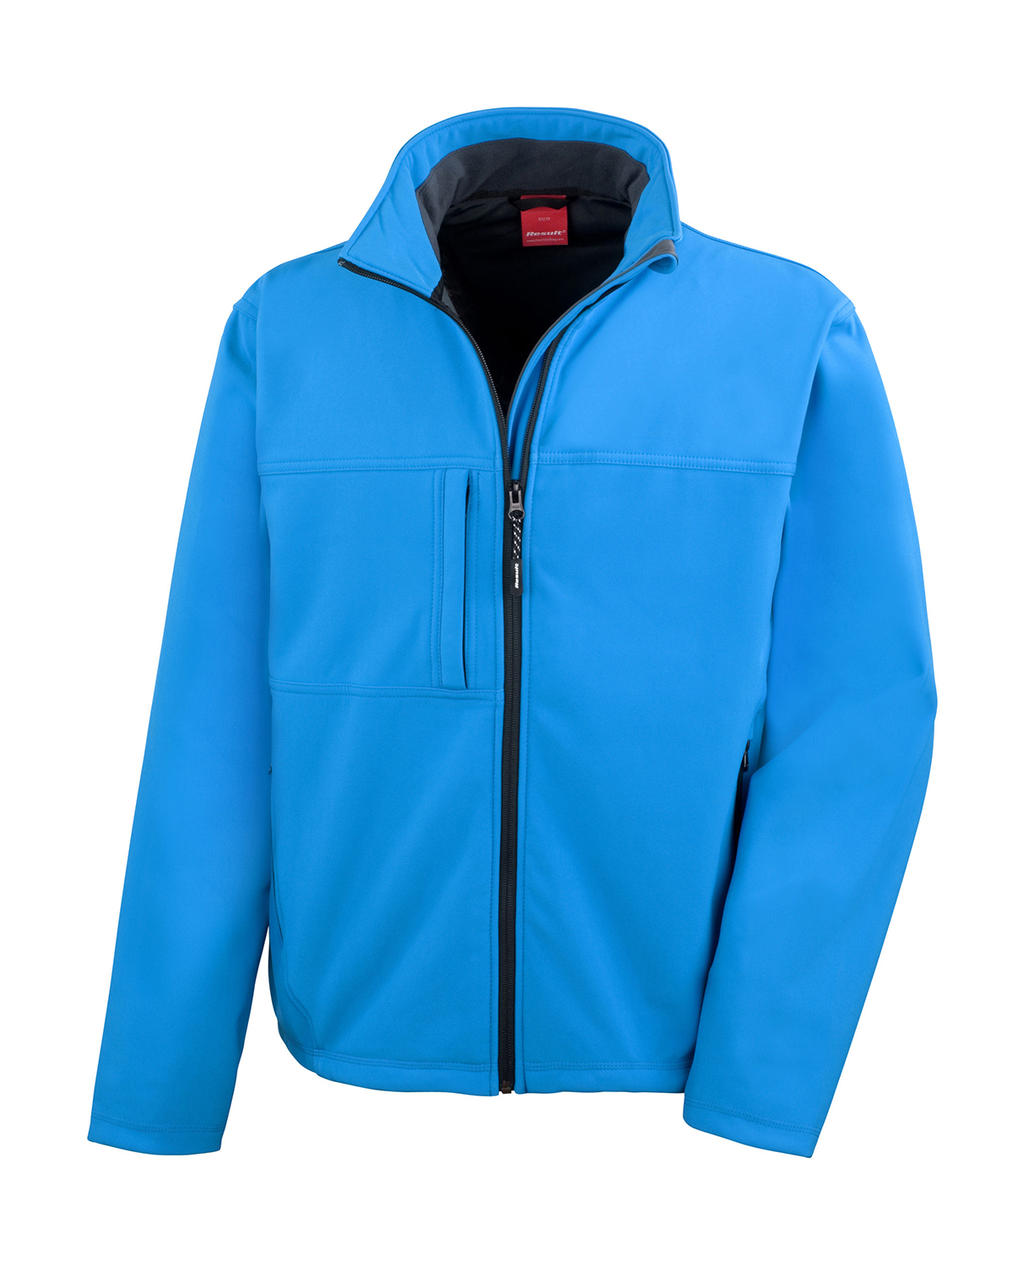  Mens Classic Softshell Jacket in Farbe Azure